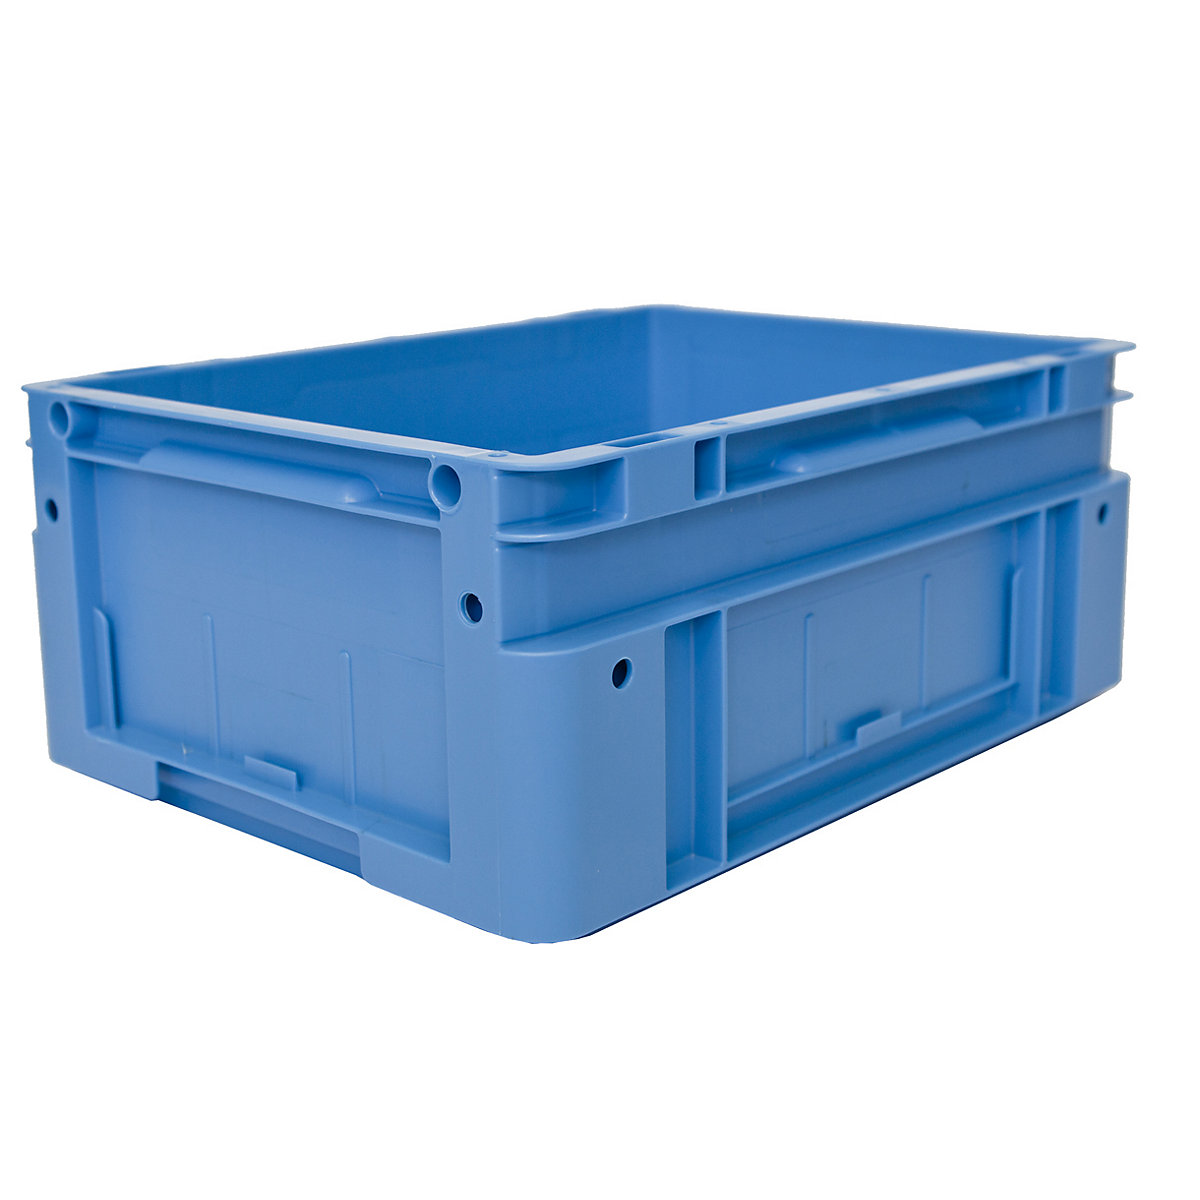 Euro size stacking containers, external LxWxH 400 x 300 x 170 mm, blue, pack of 4